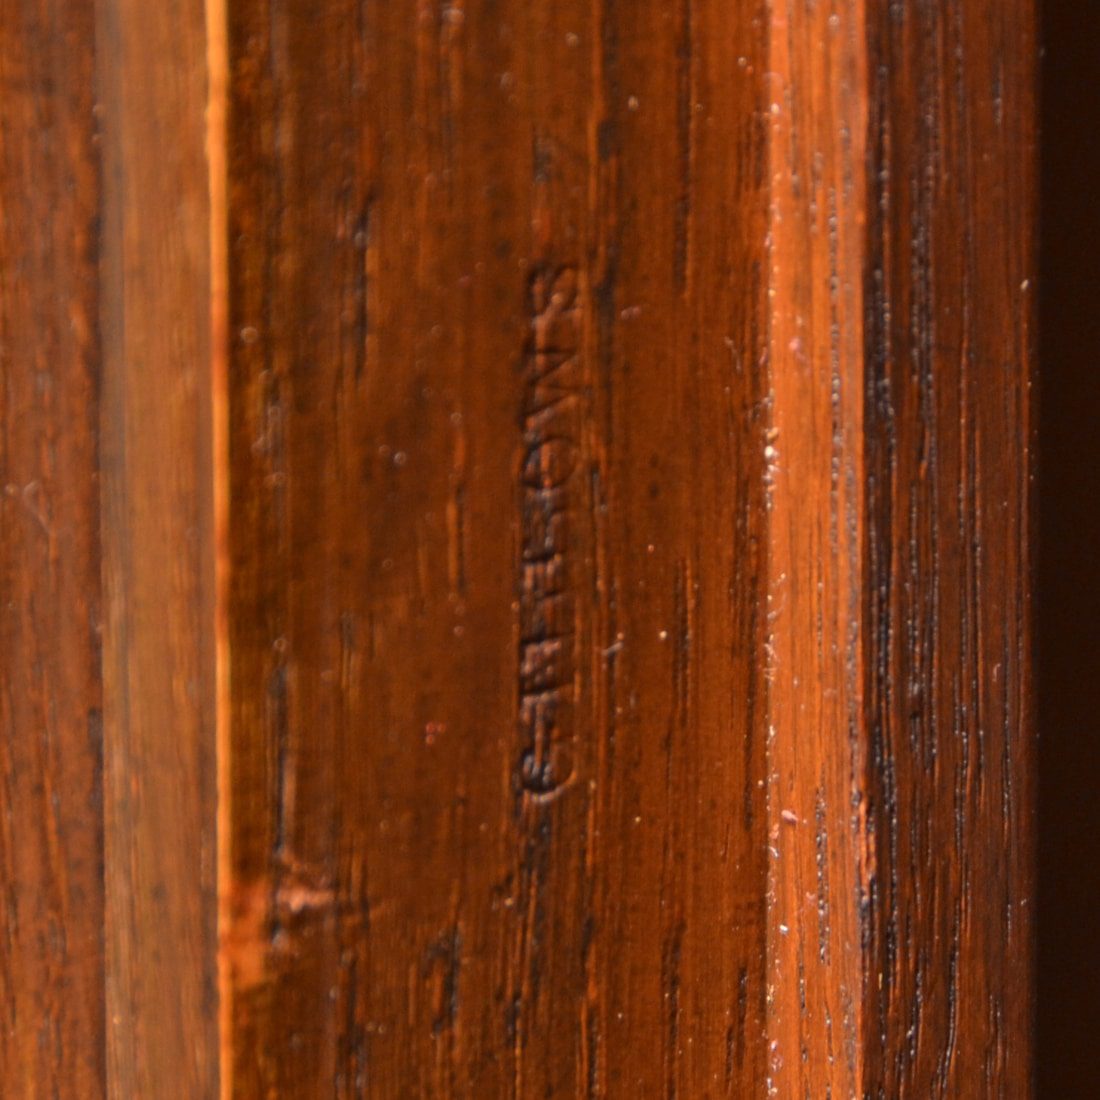 Stamp on the Side of the Wardrobe door